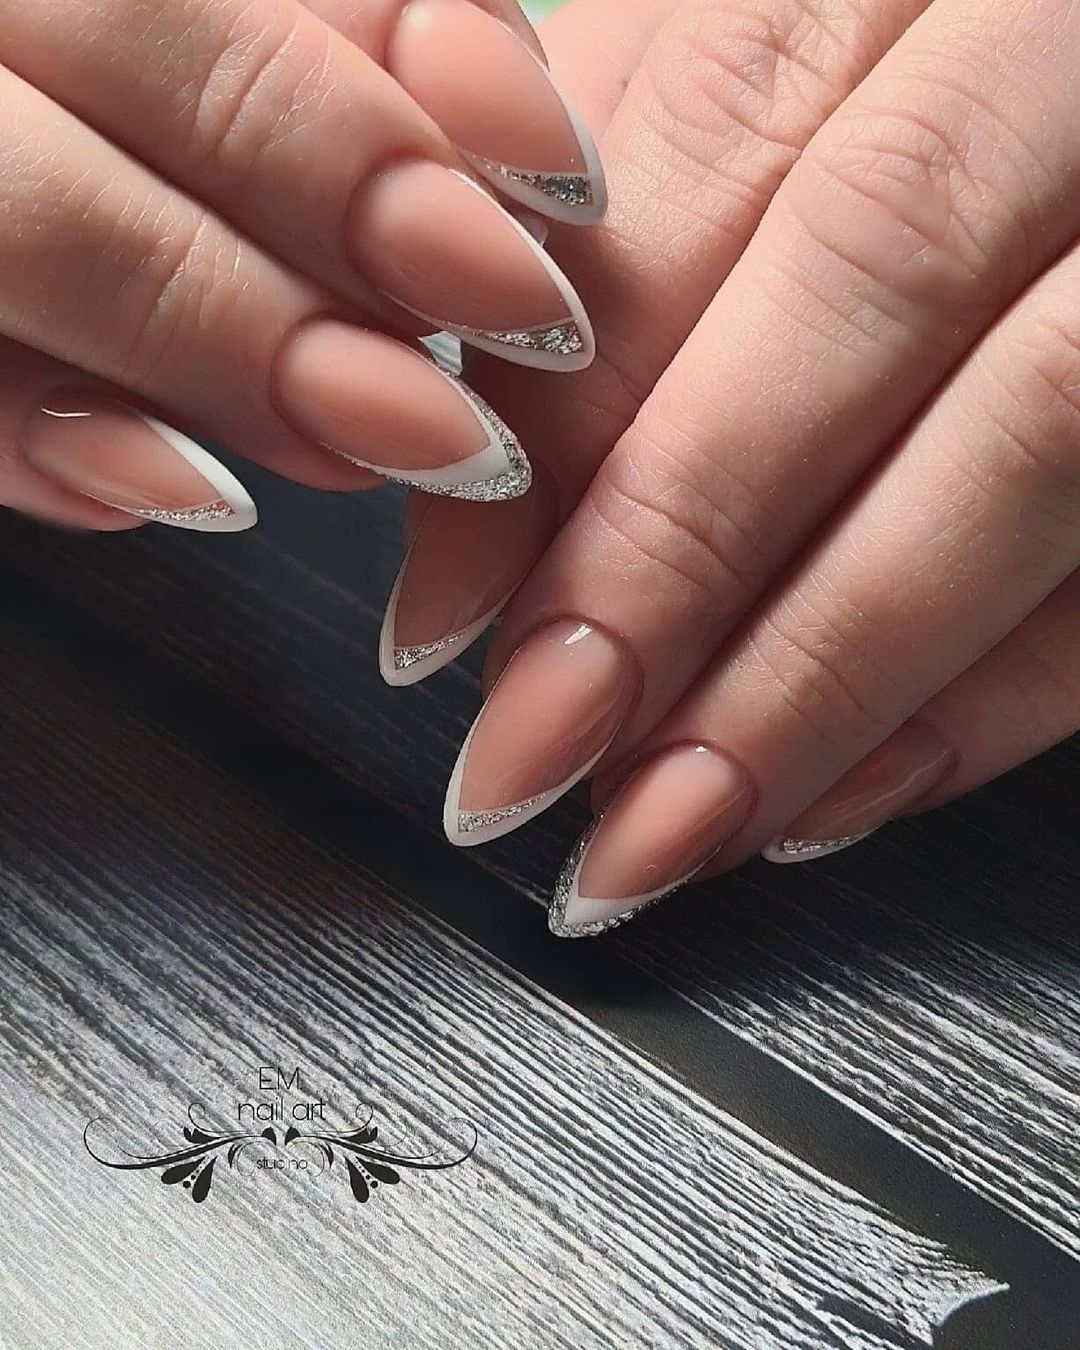 French bianco con base nude - @ideas_for_nailart